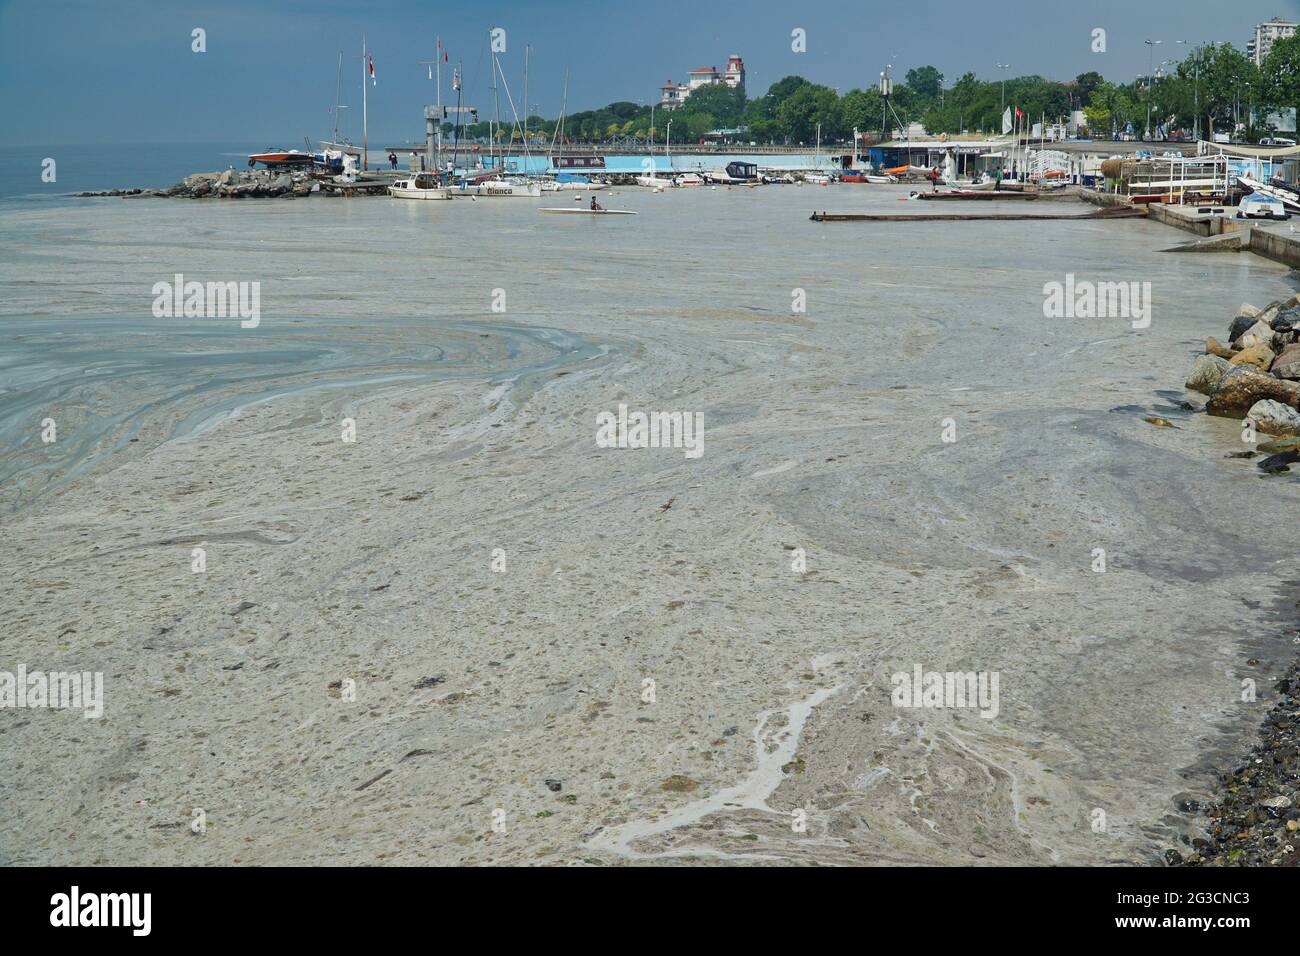 Turkey’s Sea of Marmara, that connects the Black Sea to the Aegean Sea, has witnessed the largest outbreak of sea snot or mucilage Stock Photo